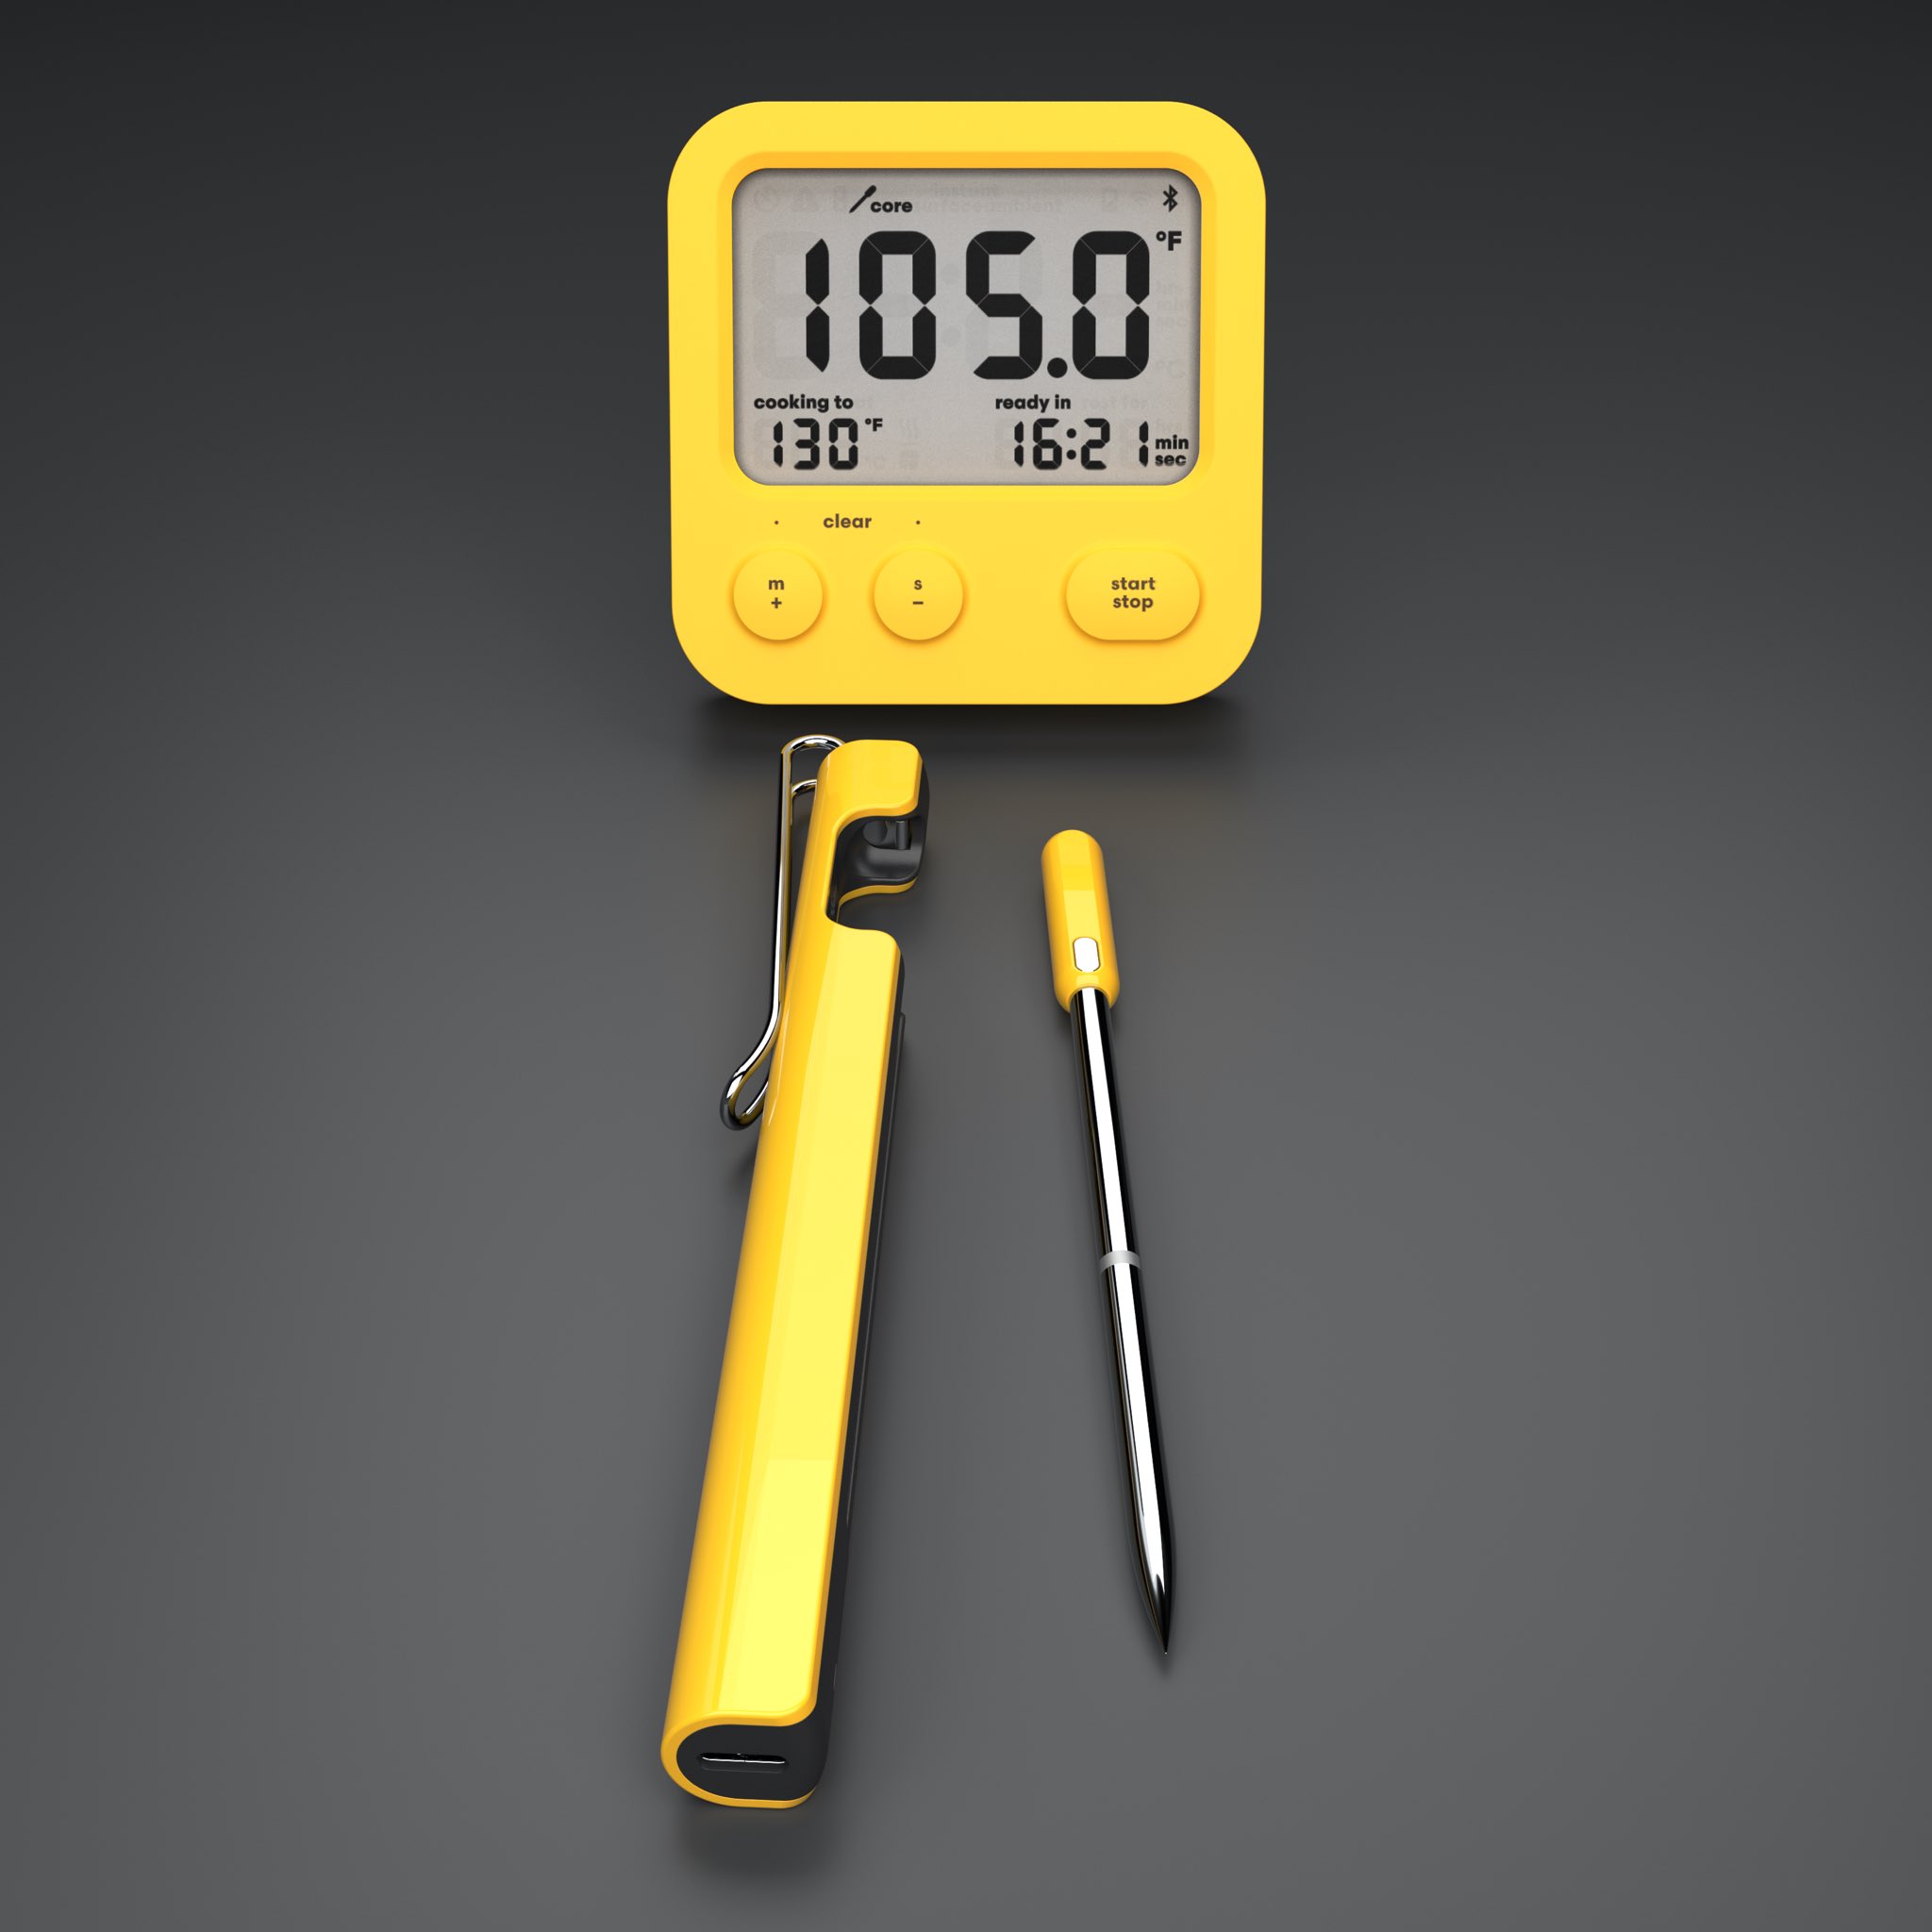 Combustion Predictive Thermometer & Display, wireless with 8 sensors